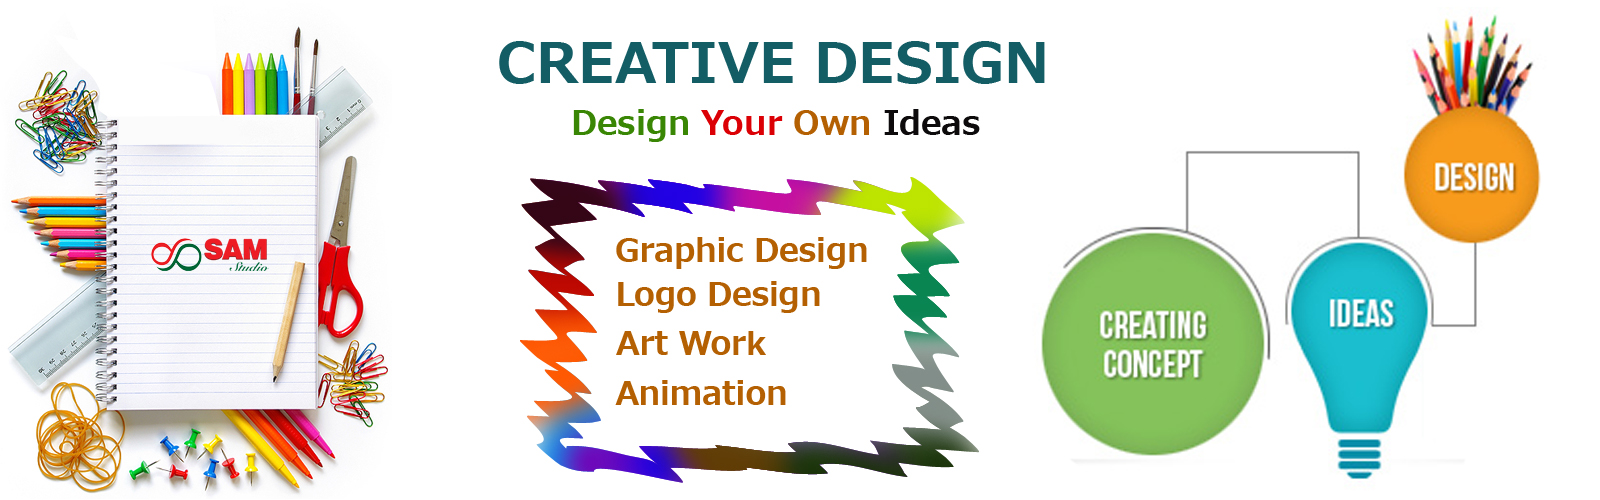 Outsource Creative Design Services – Graphic Designing, Writing, Animation, Film and Artwork